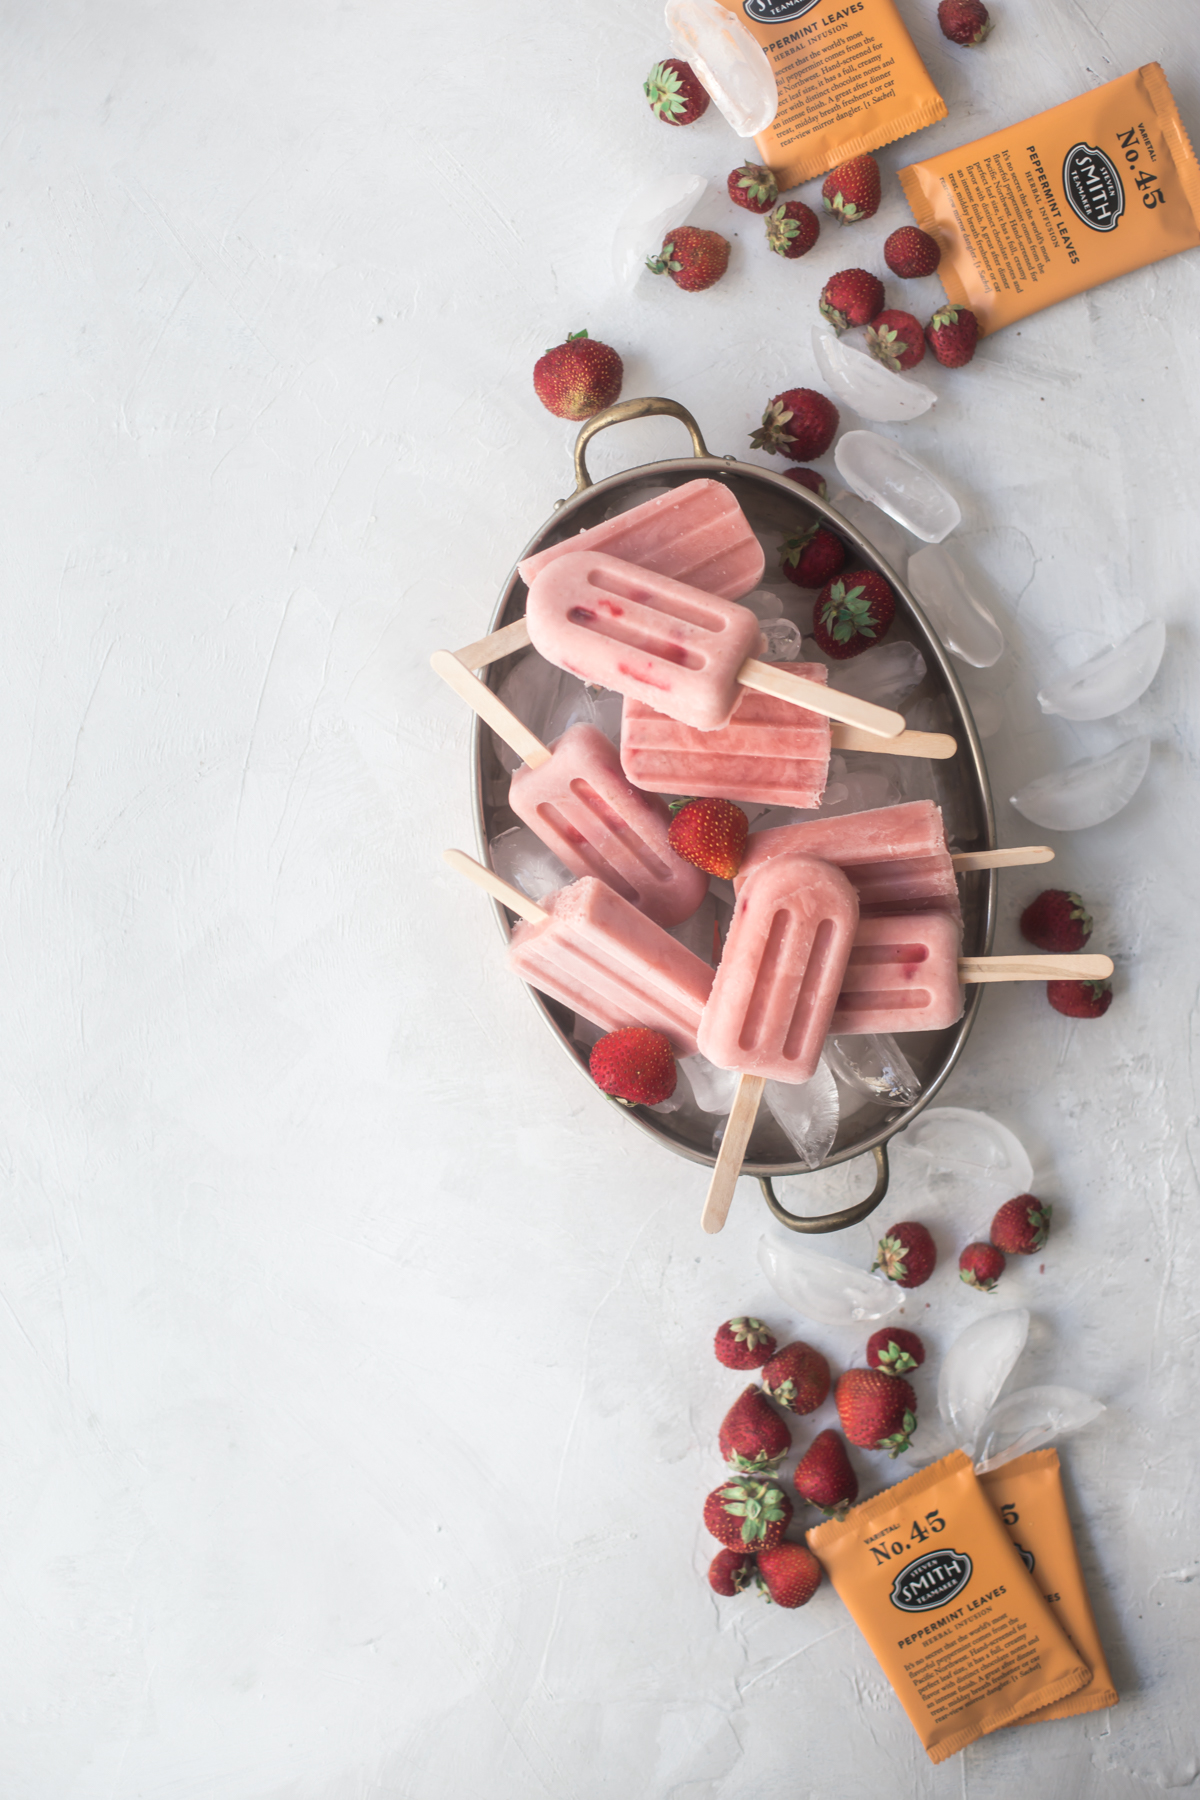 Strawberry & Peppermint Tea Creamsicles